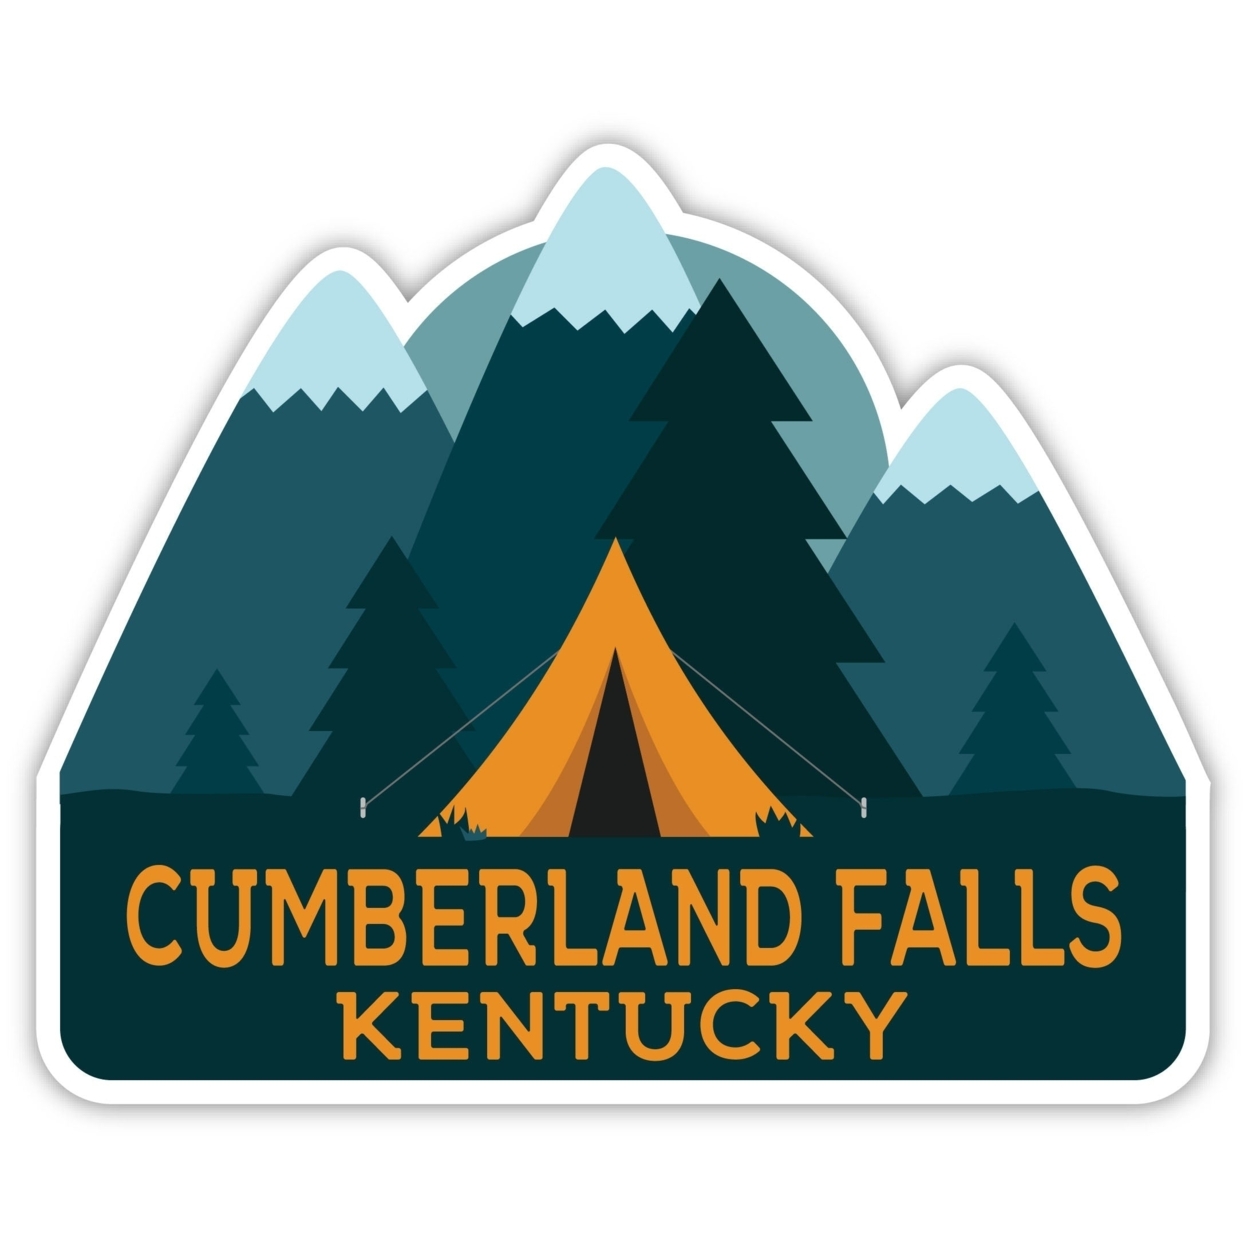 Cumberland Falls Kentucky Souvenir Decorative Stickers (Choose Theme And Size) - 4-Pack, 8-Inch, Tent